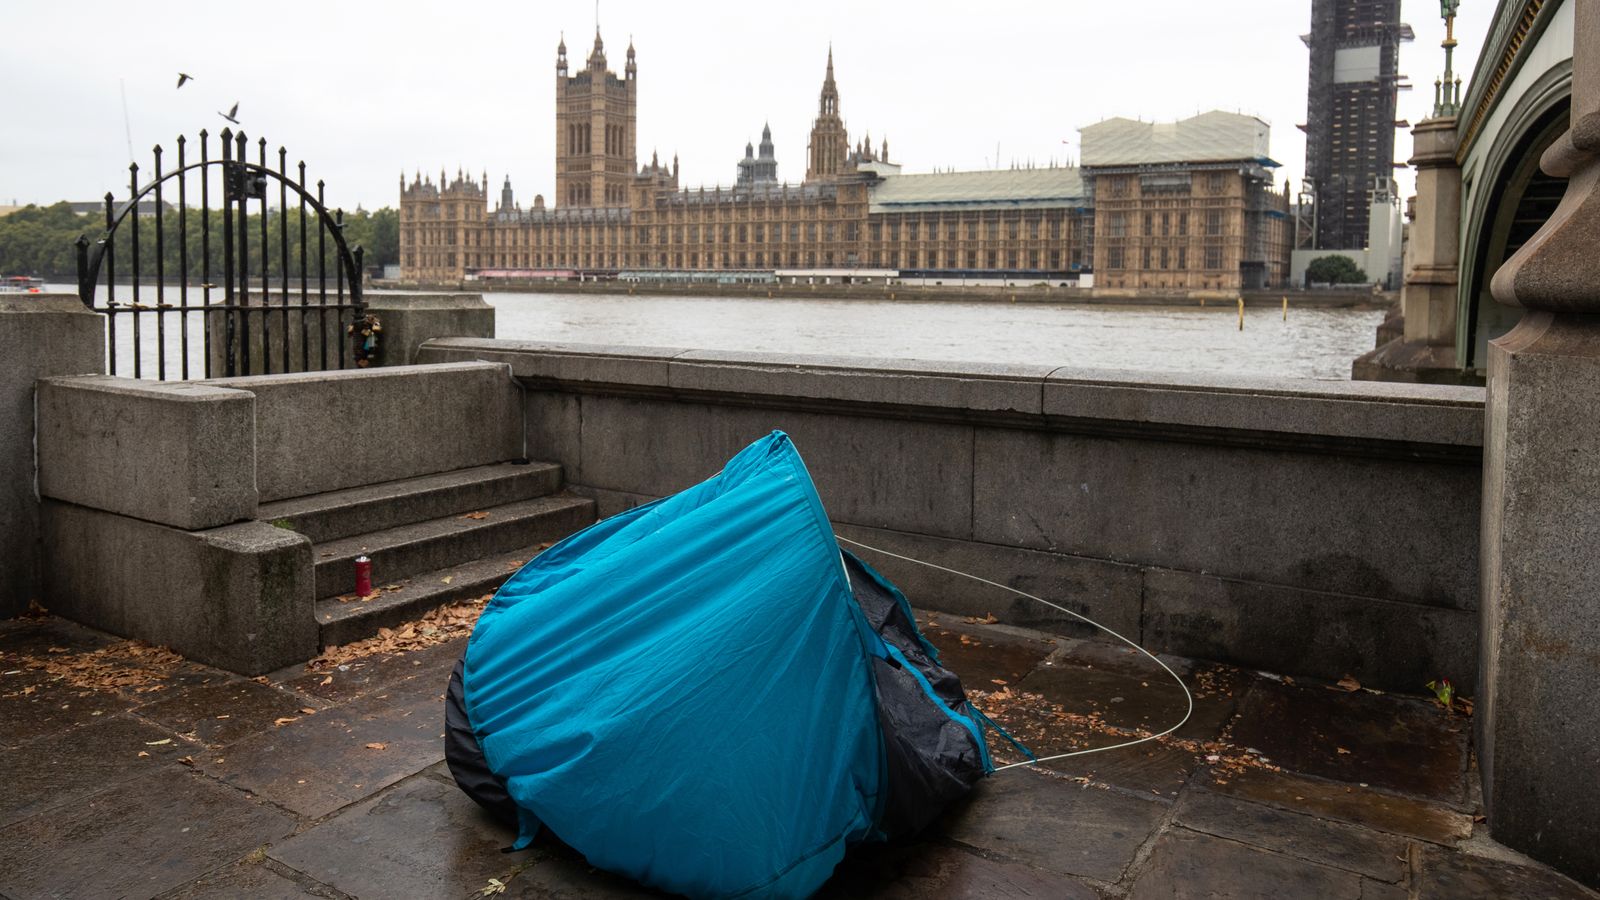 Suella Braverman 'wants to restrict use of tents by homeless people'